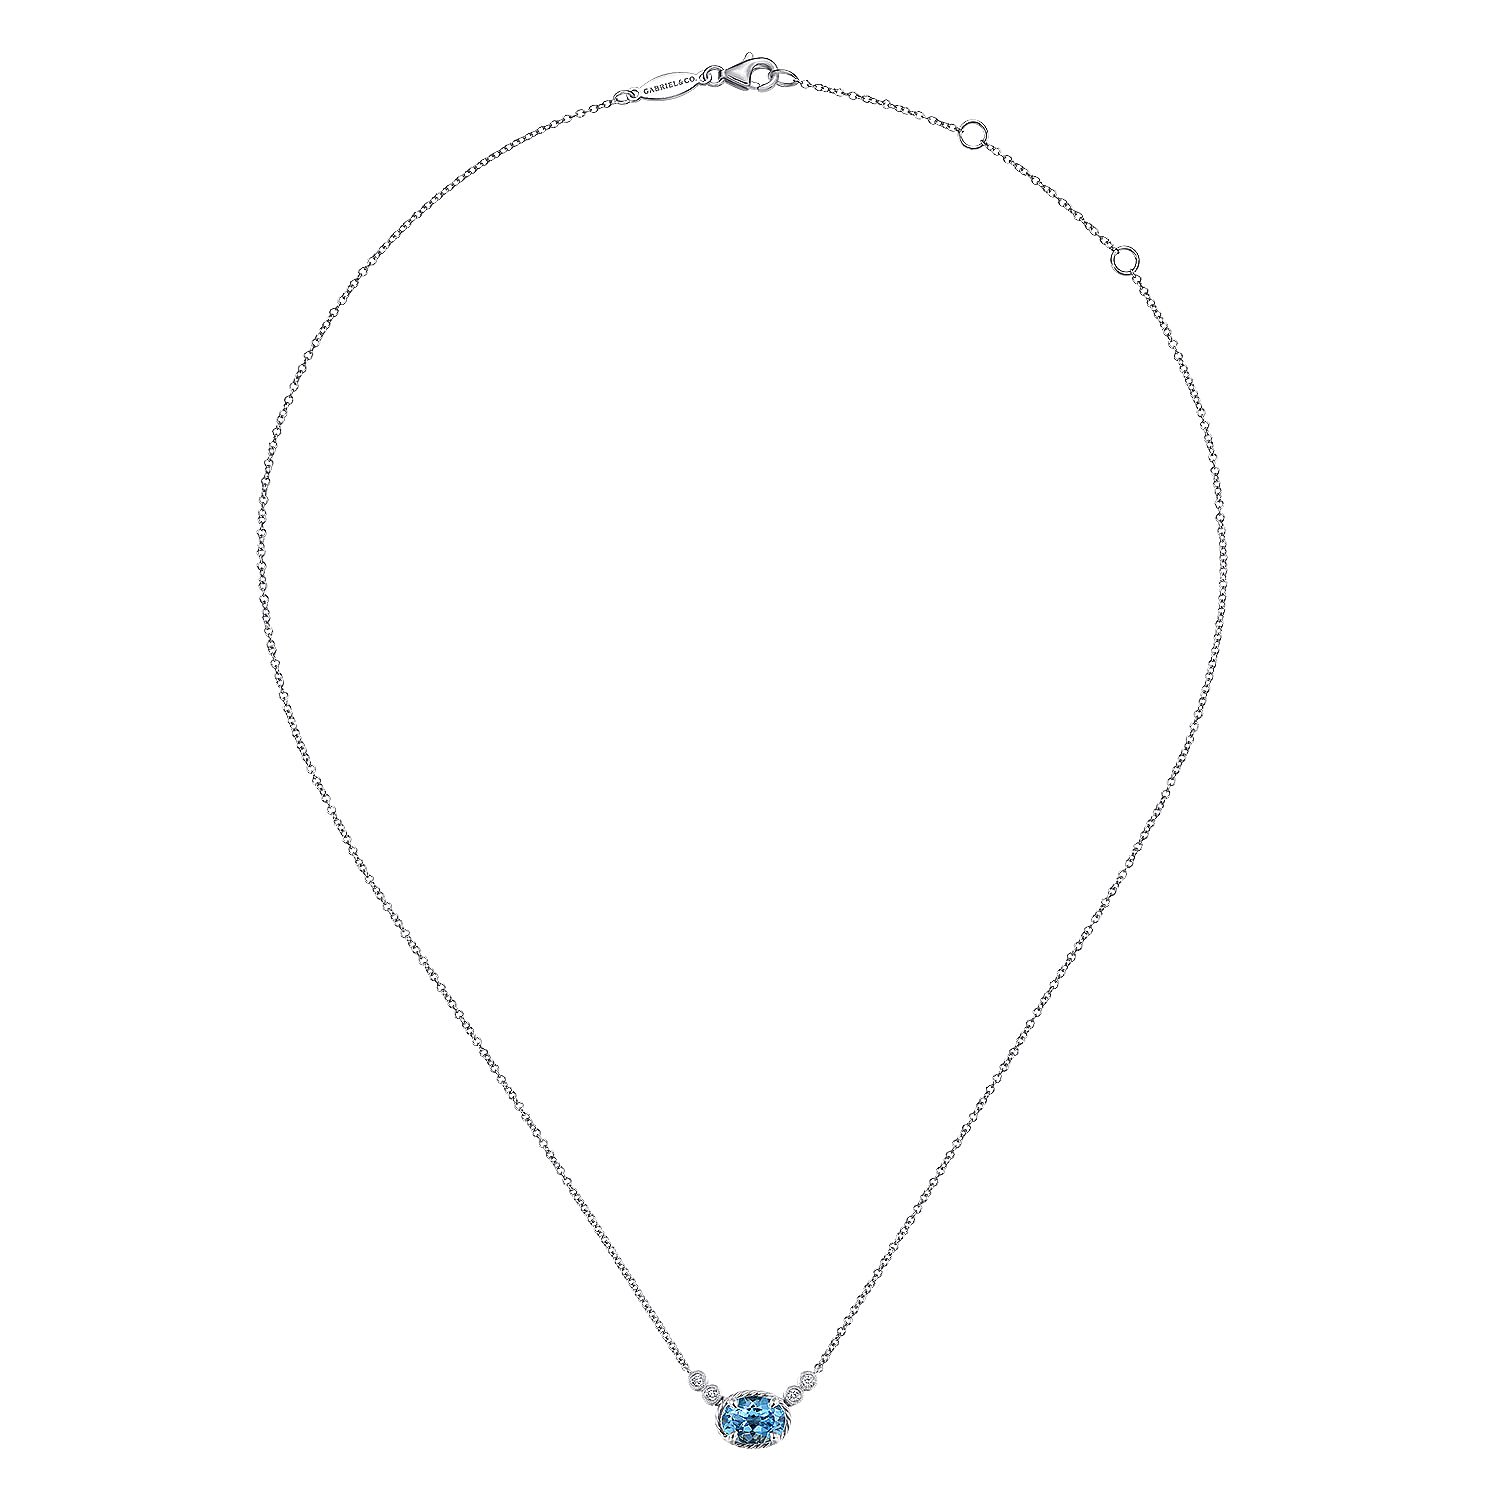 14K White Gold Oval Swiss Blue Topaz Pendant Necklace with Diamond Accents